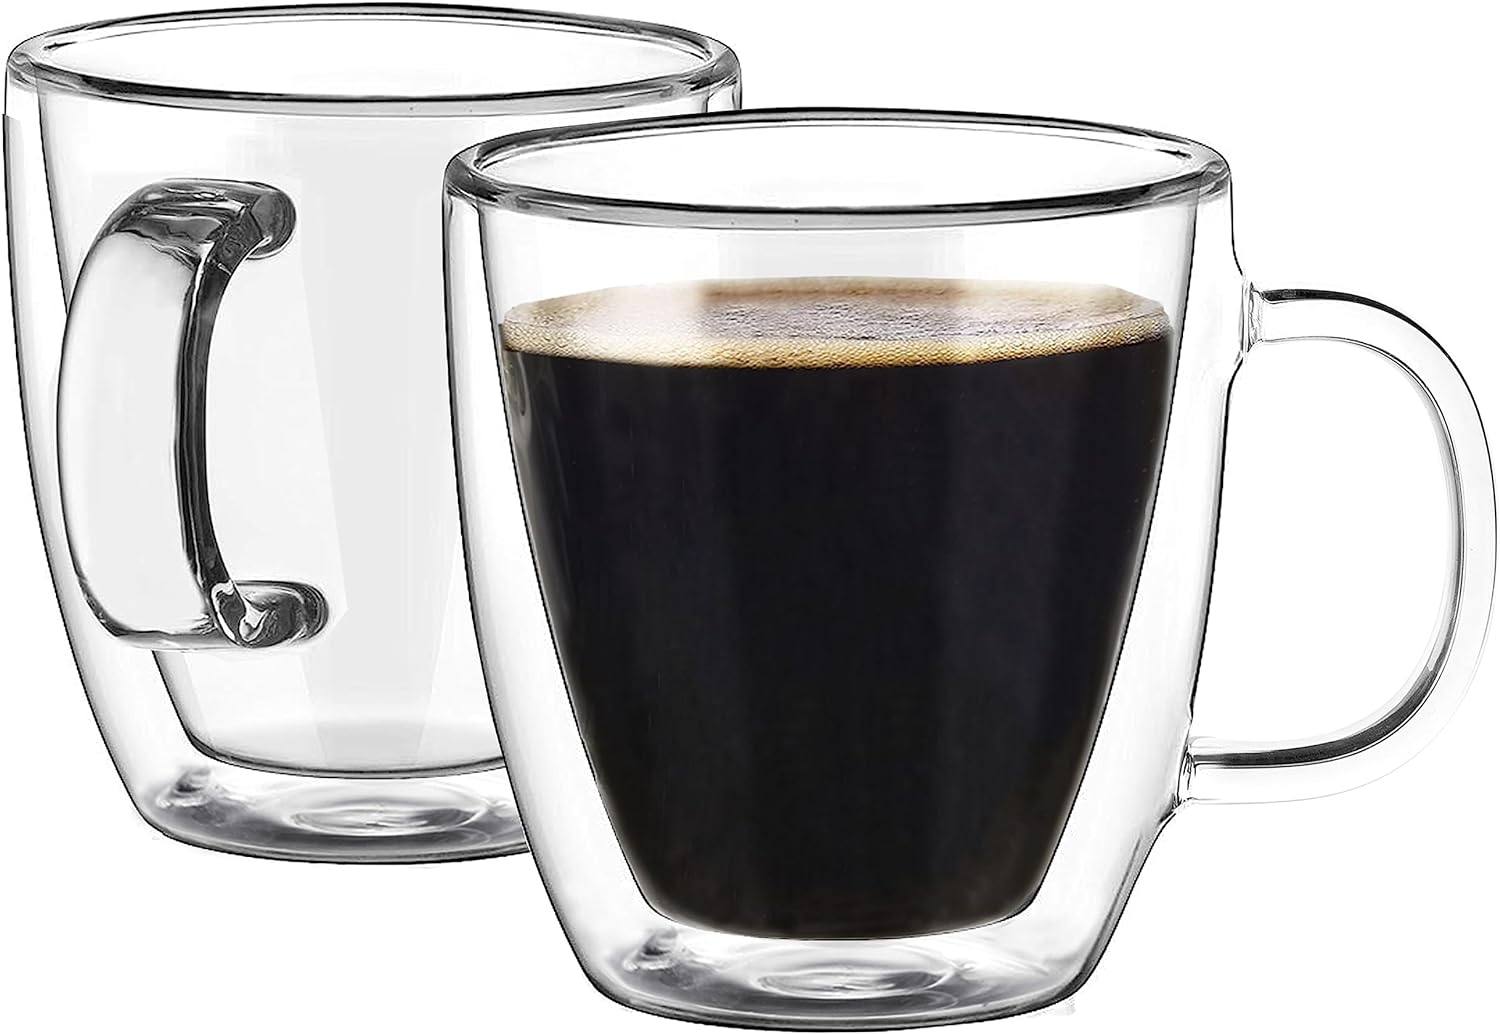 double insulation cup espresso cup glass |5.5oz